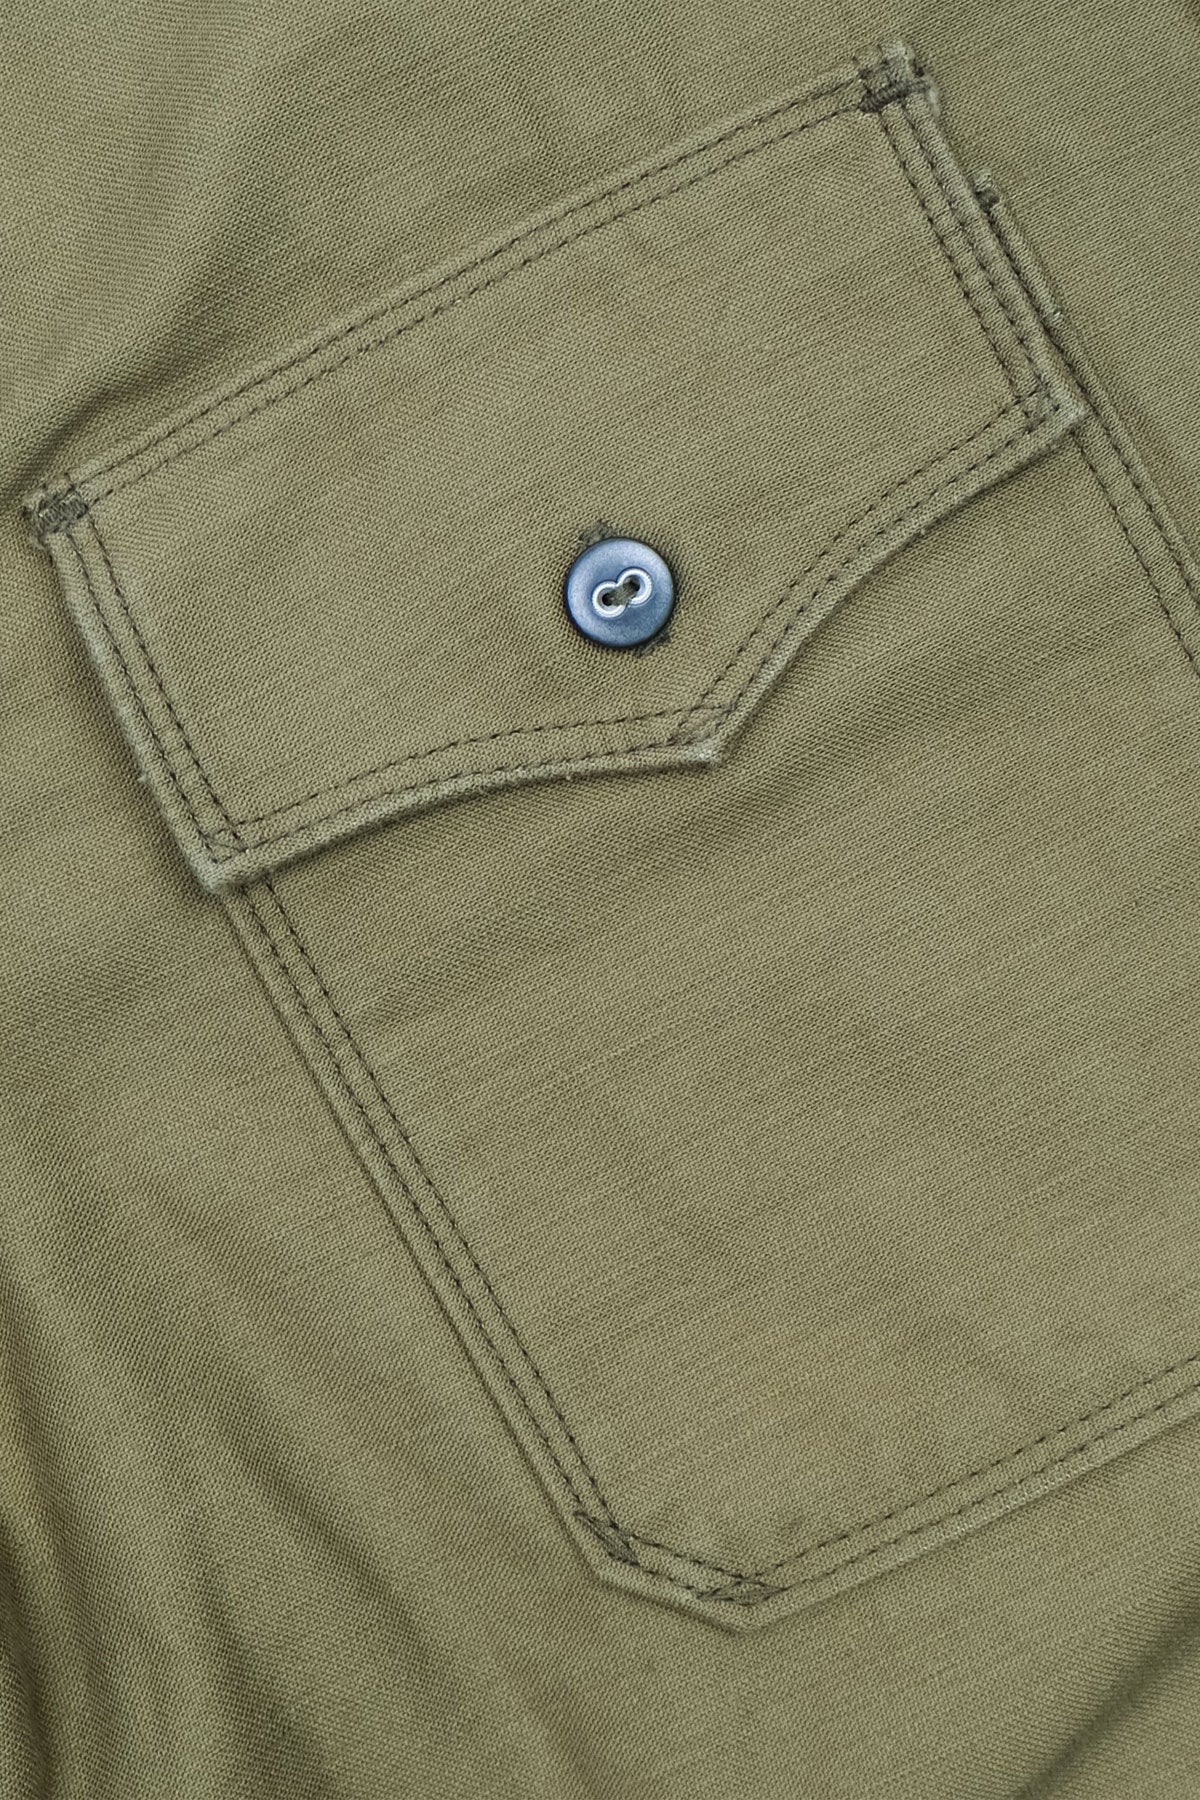 Freenote Cloth - Scout Sportsman Shirt in Olive